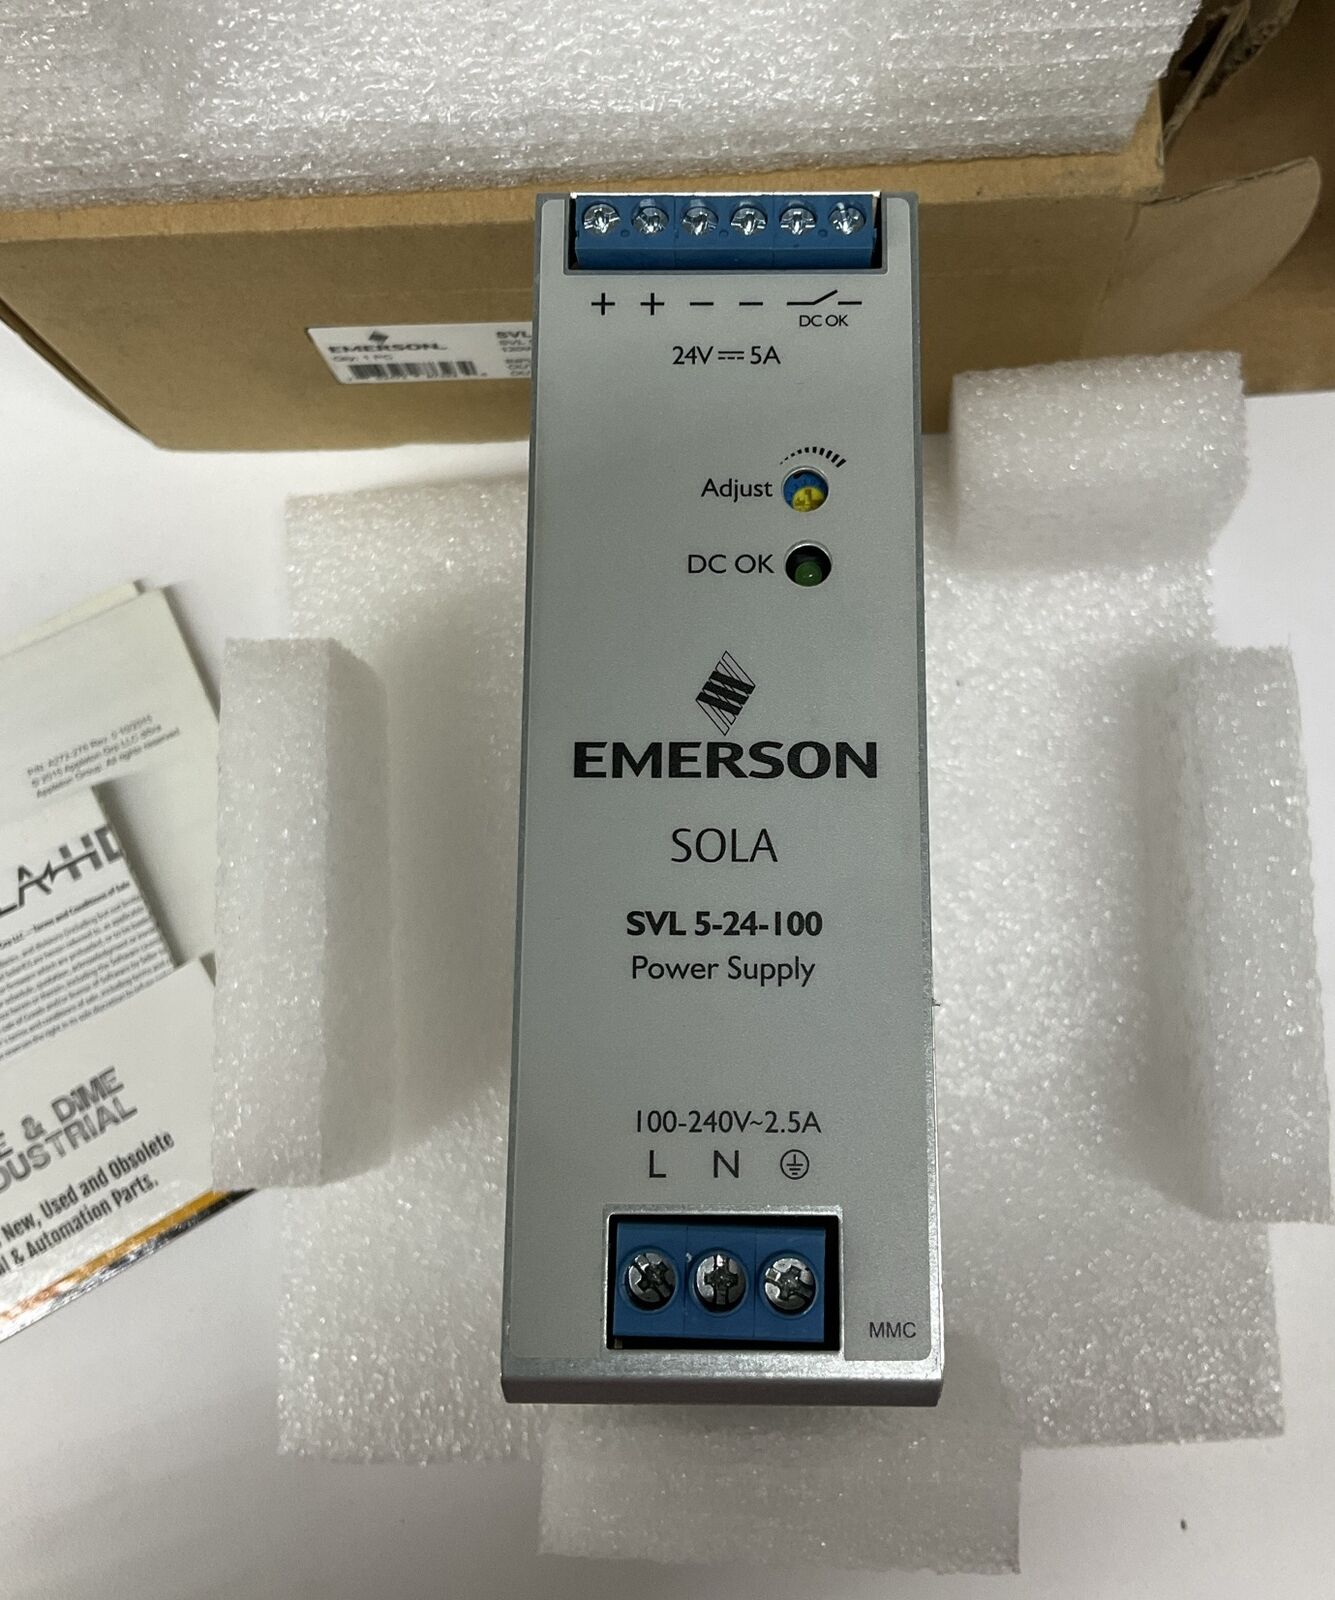 Emerson Sola SVL 5-24-100  DIN Rail Power Supply IN: 100-240 OUT: 24VDC (SH106)